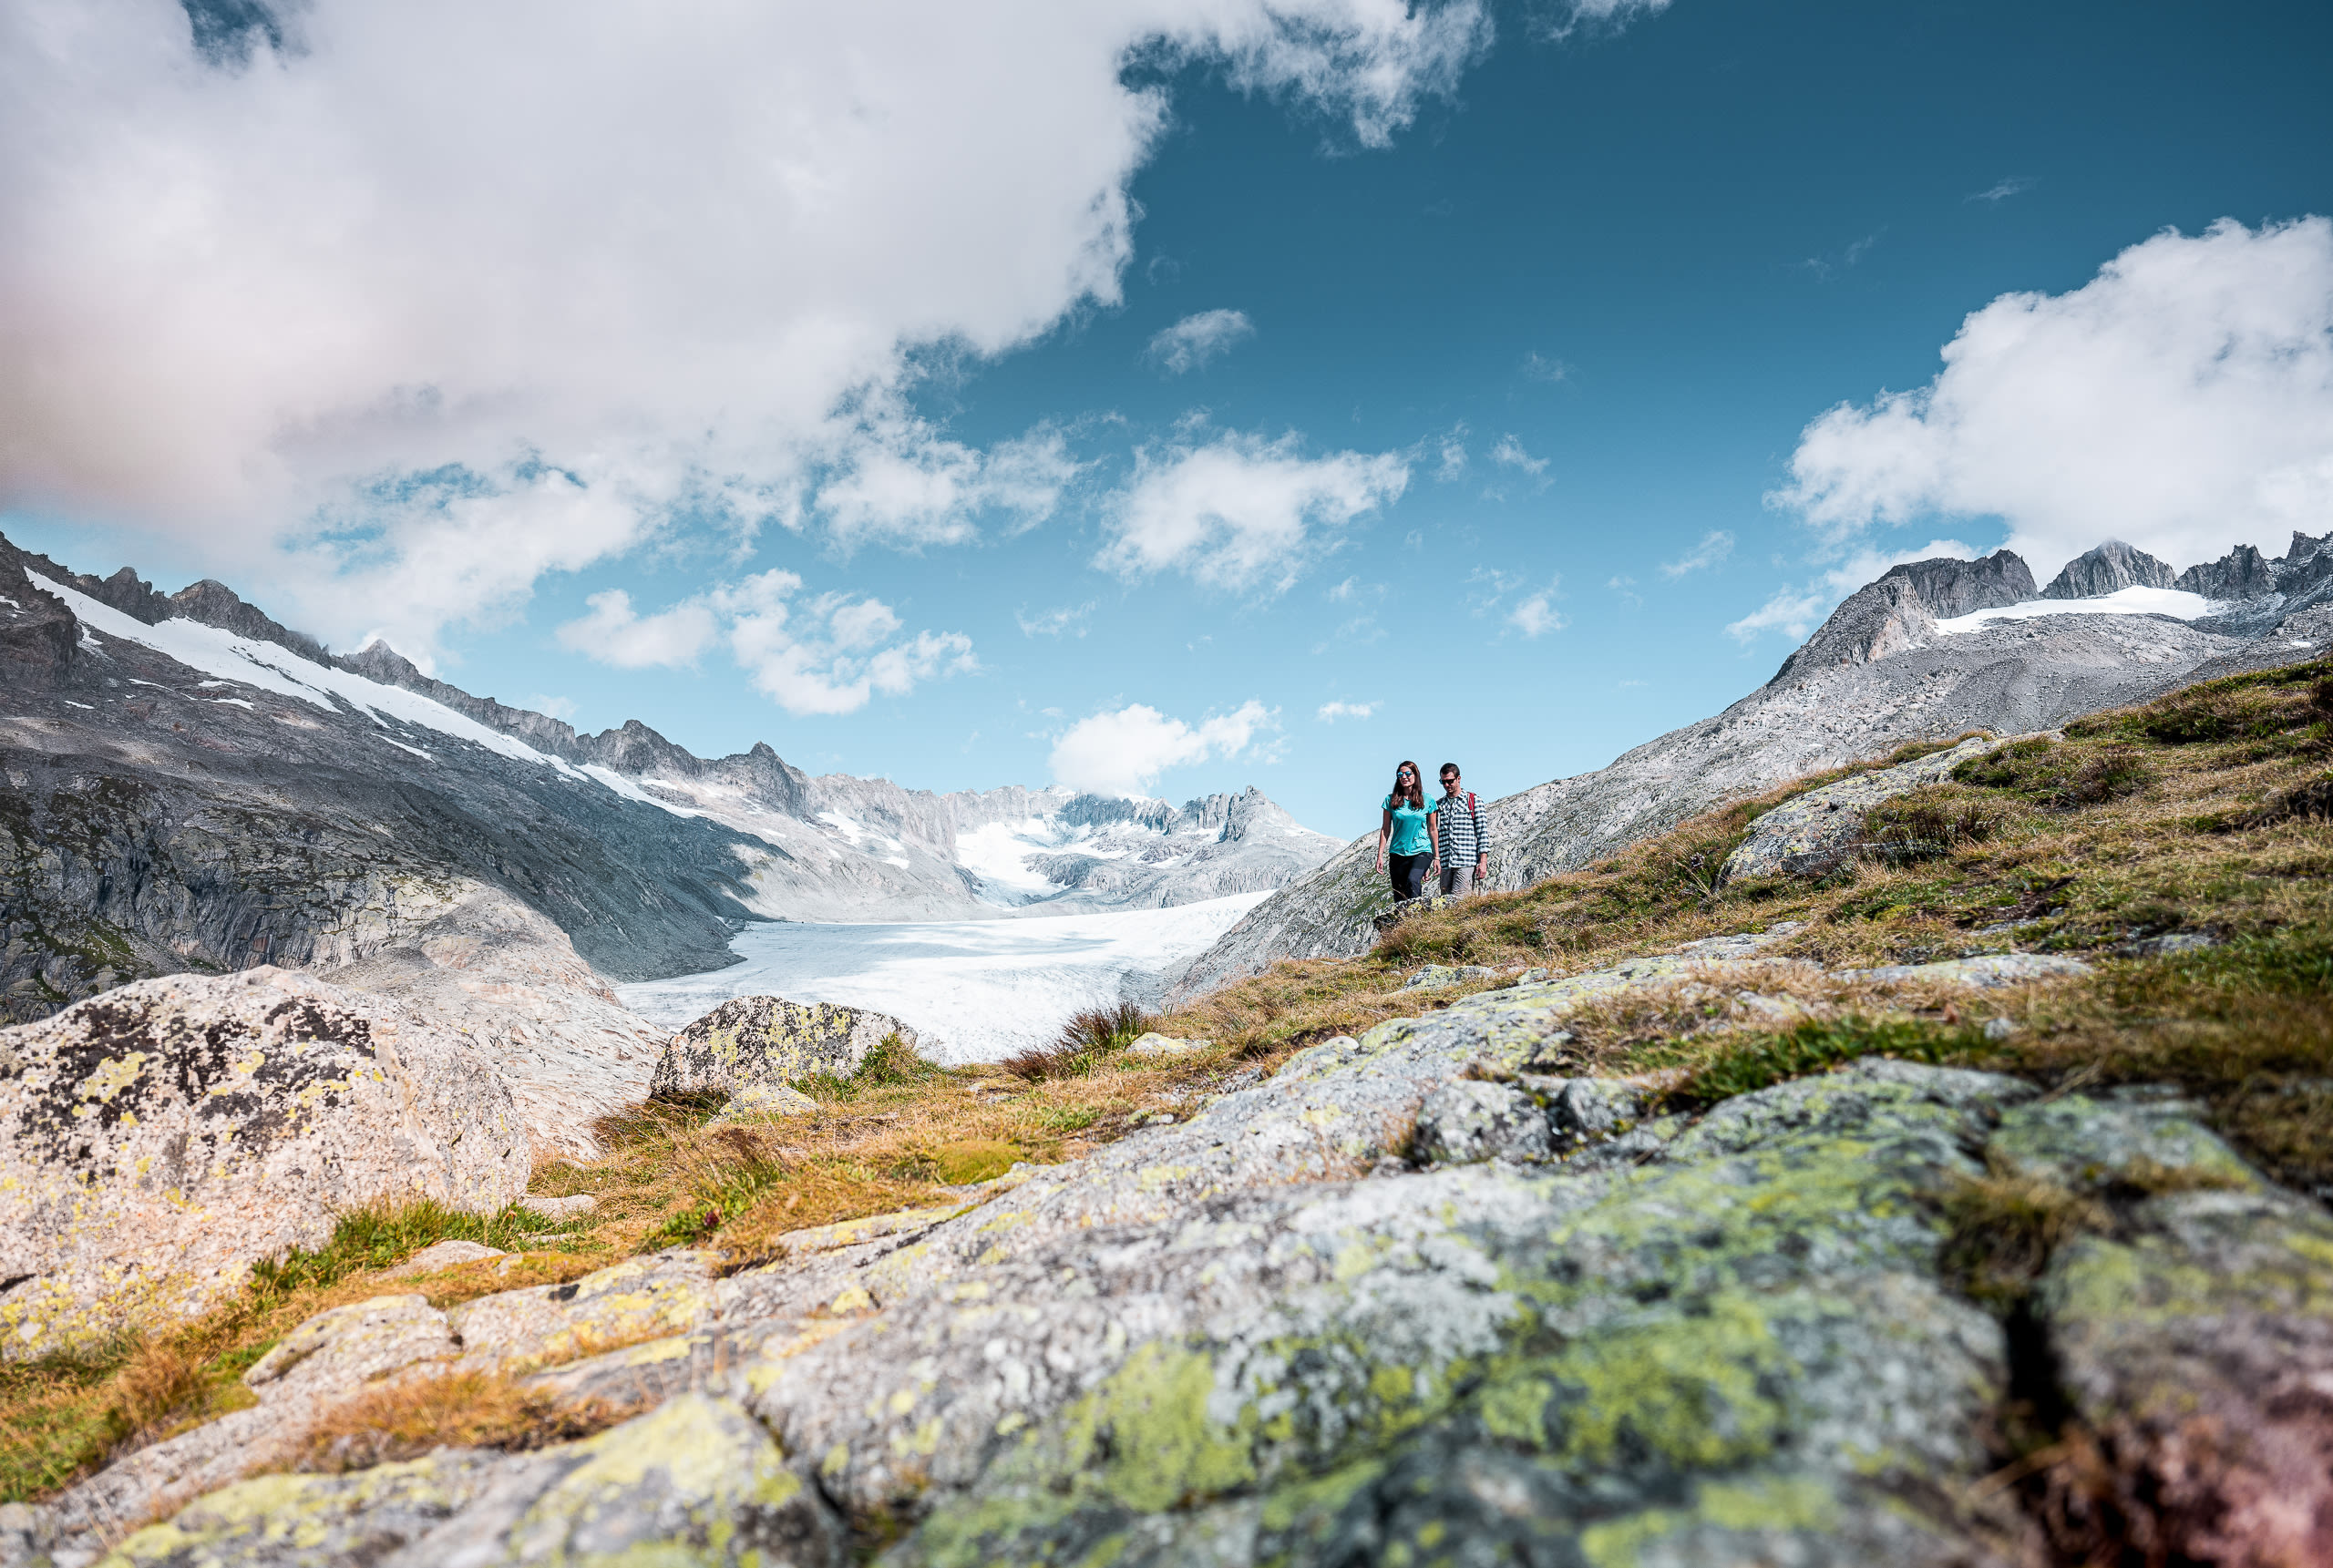 Two people admiring the beautiful view in Obergoms in Valais, Switzerland.